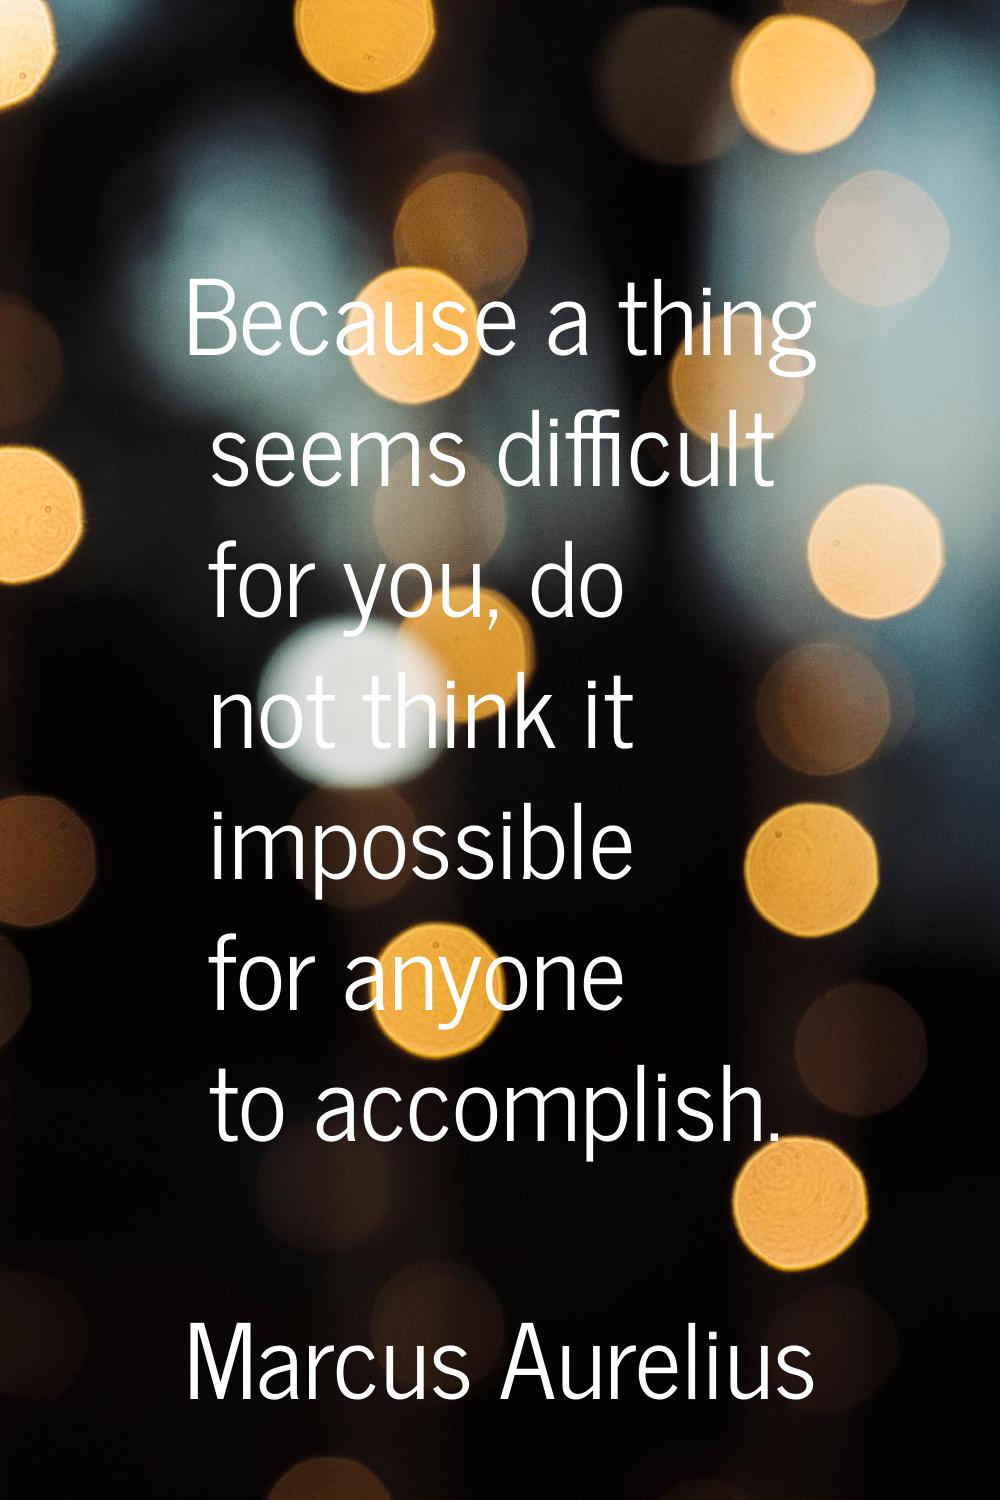 Because a thing seems difficult for you, do not think it impossible for anyone to accomplish.